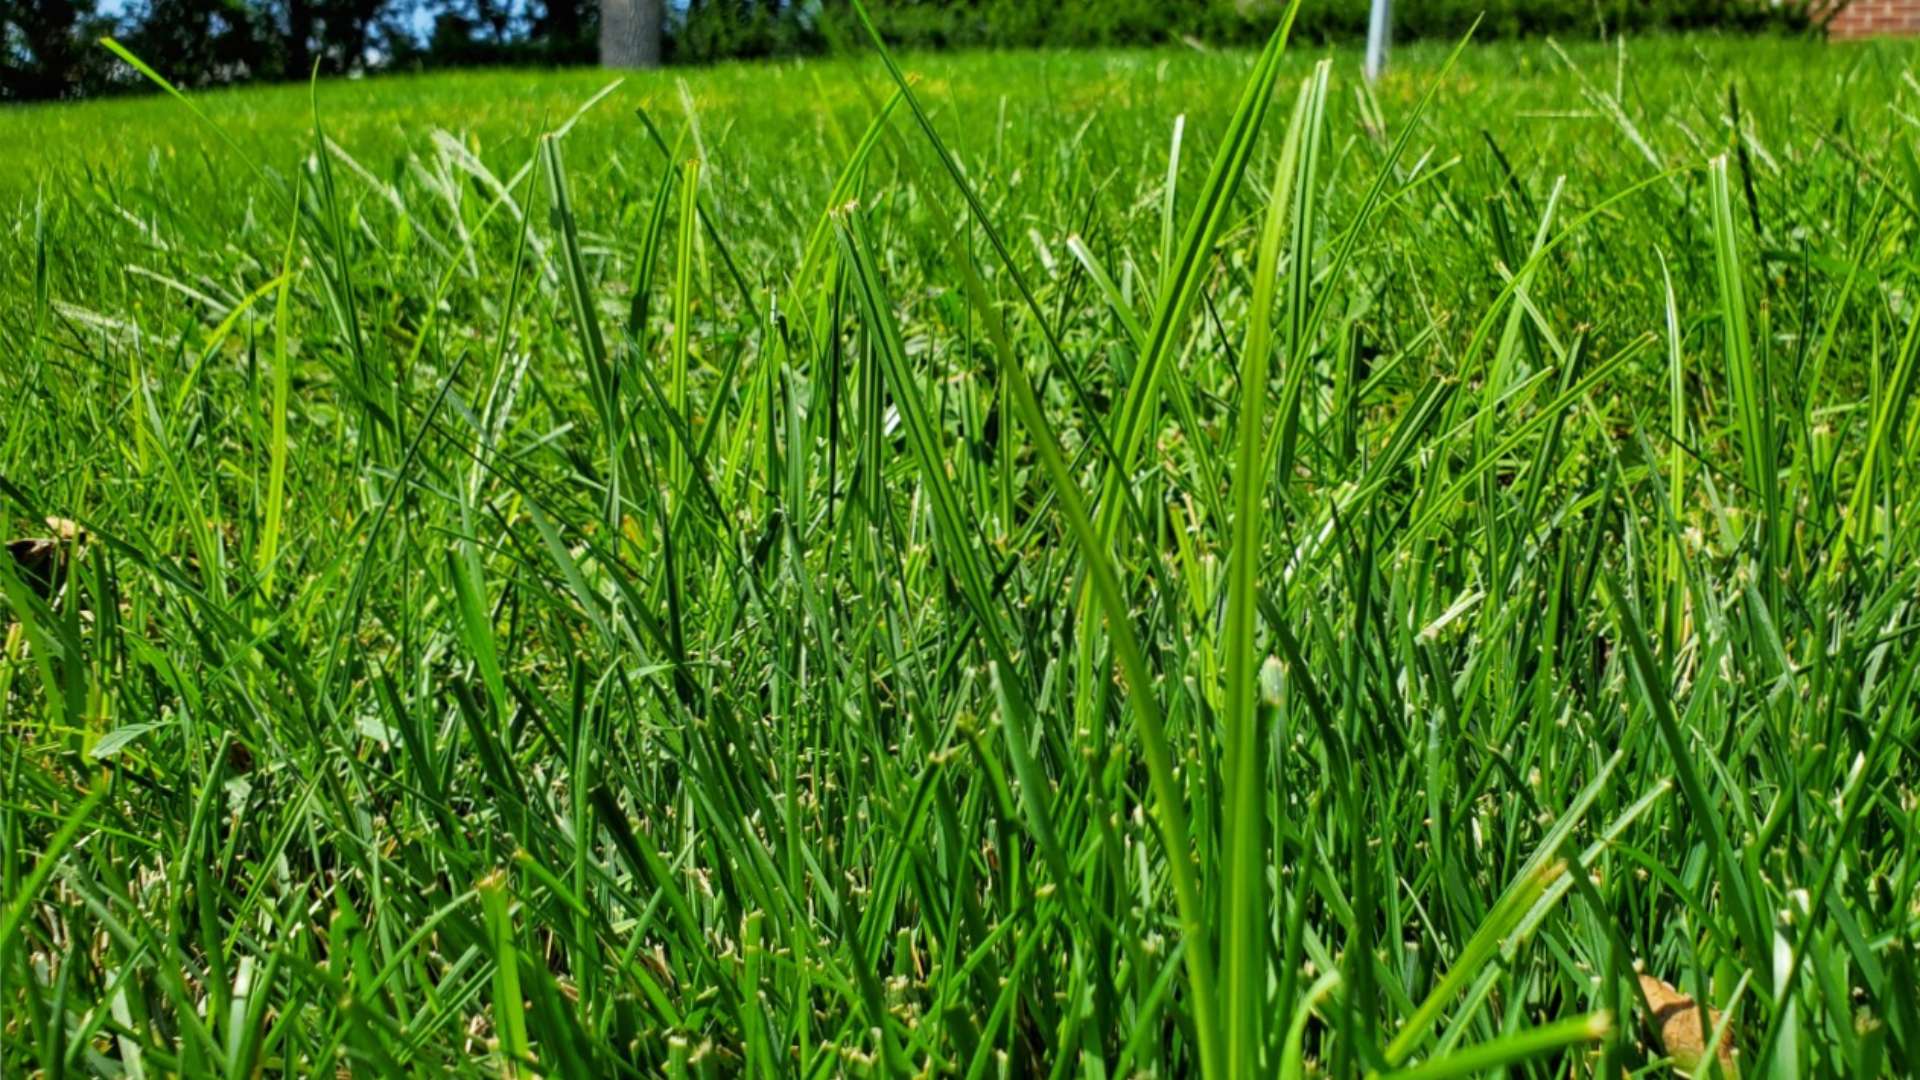 Do You Really Need Pre-Emergent & Post-Emergent Weed Control Treatments?